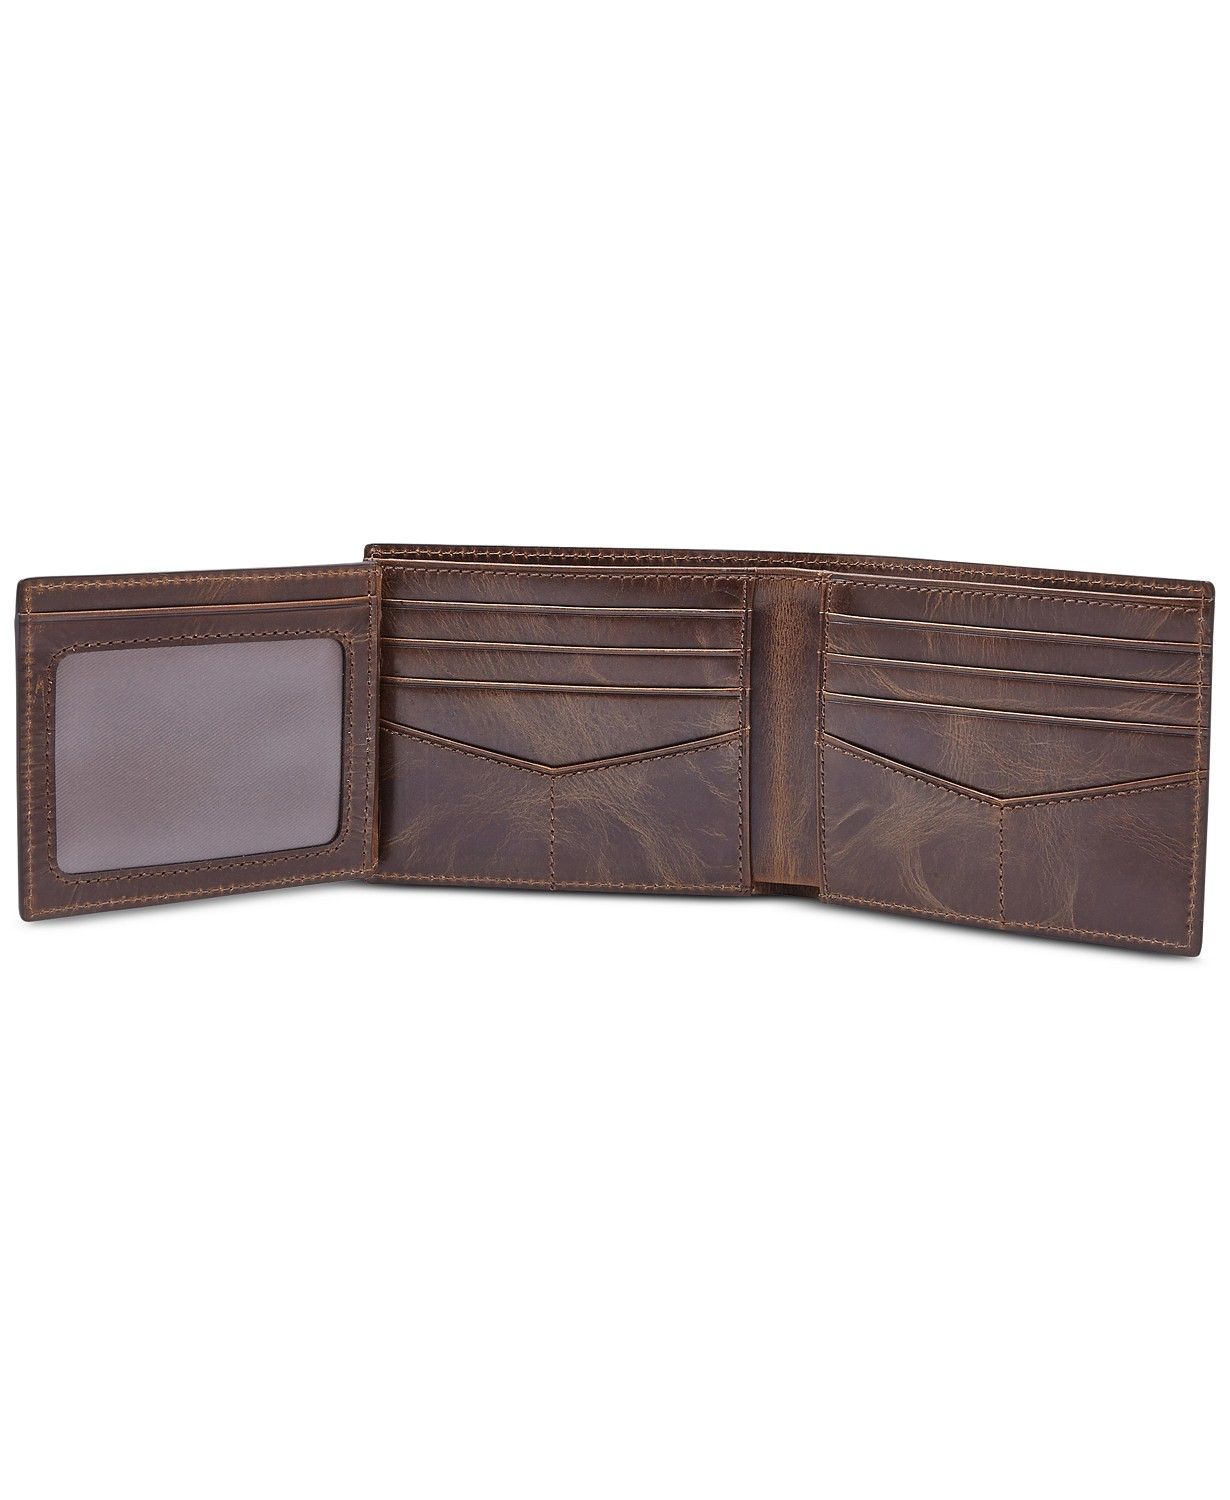 Sleek Storage: Practical and Stylish with Bifold Wallets